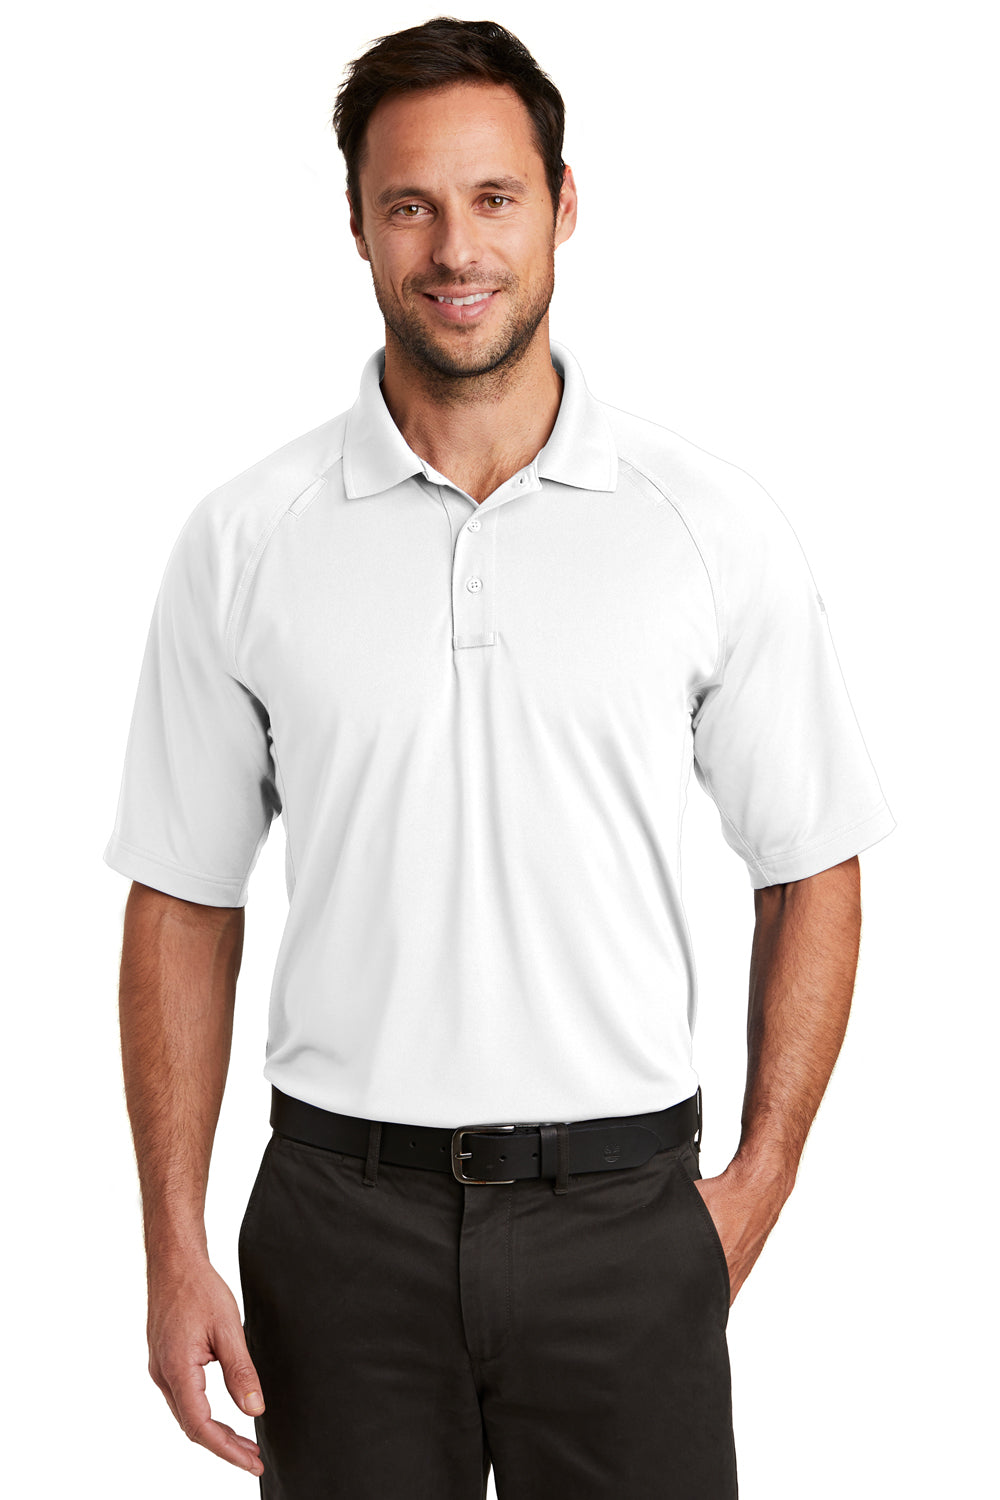 CornerStone CS420 Mens Select Tactical Moisture Wicking Short Sleeve Polo Shirt White Front